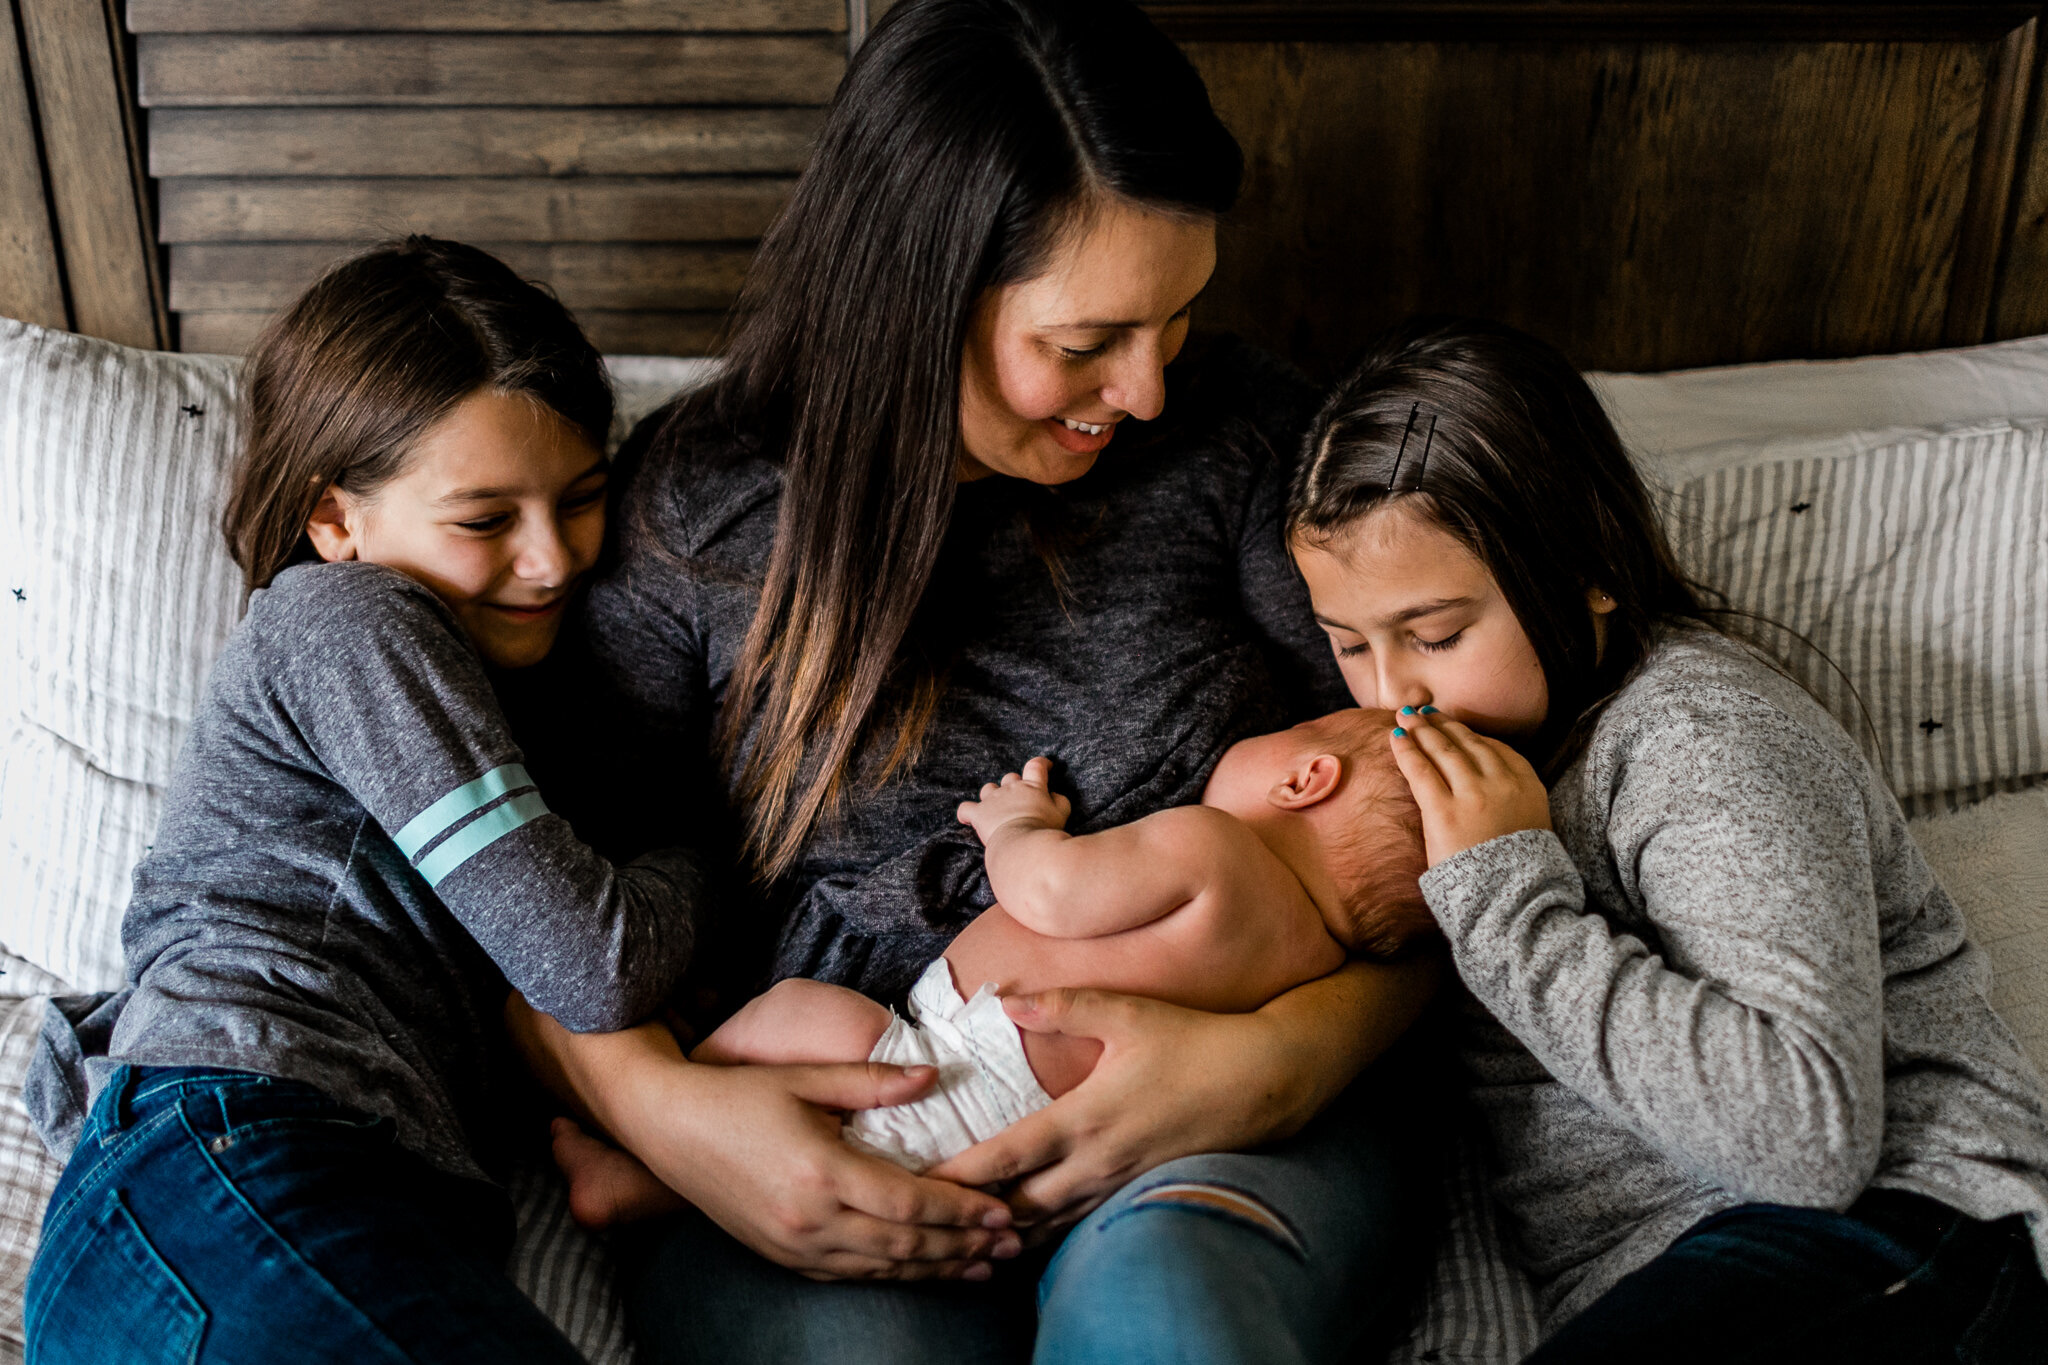 Raleigh Newborn Photographer | By G. Lin Photography | Organic photo of mother and daughters snuggling with newborn baby